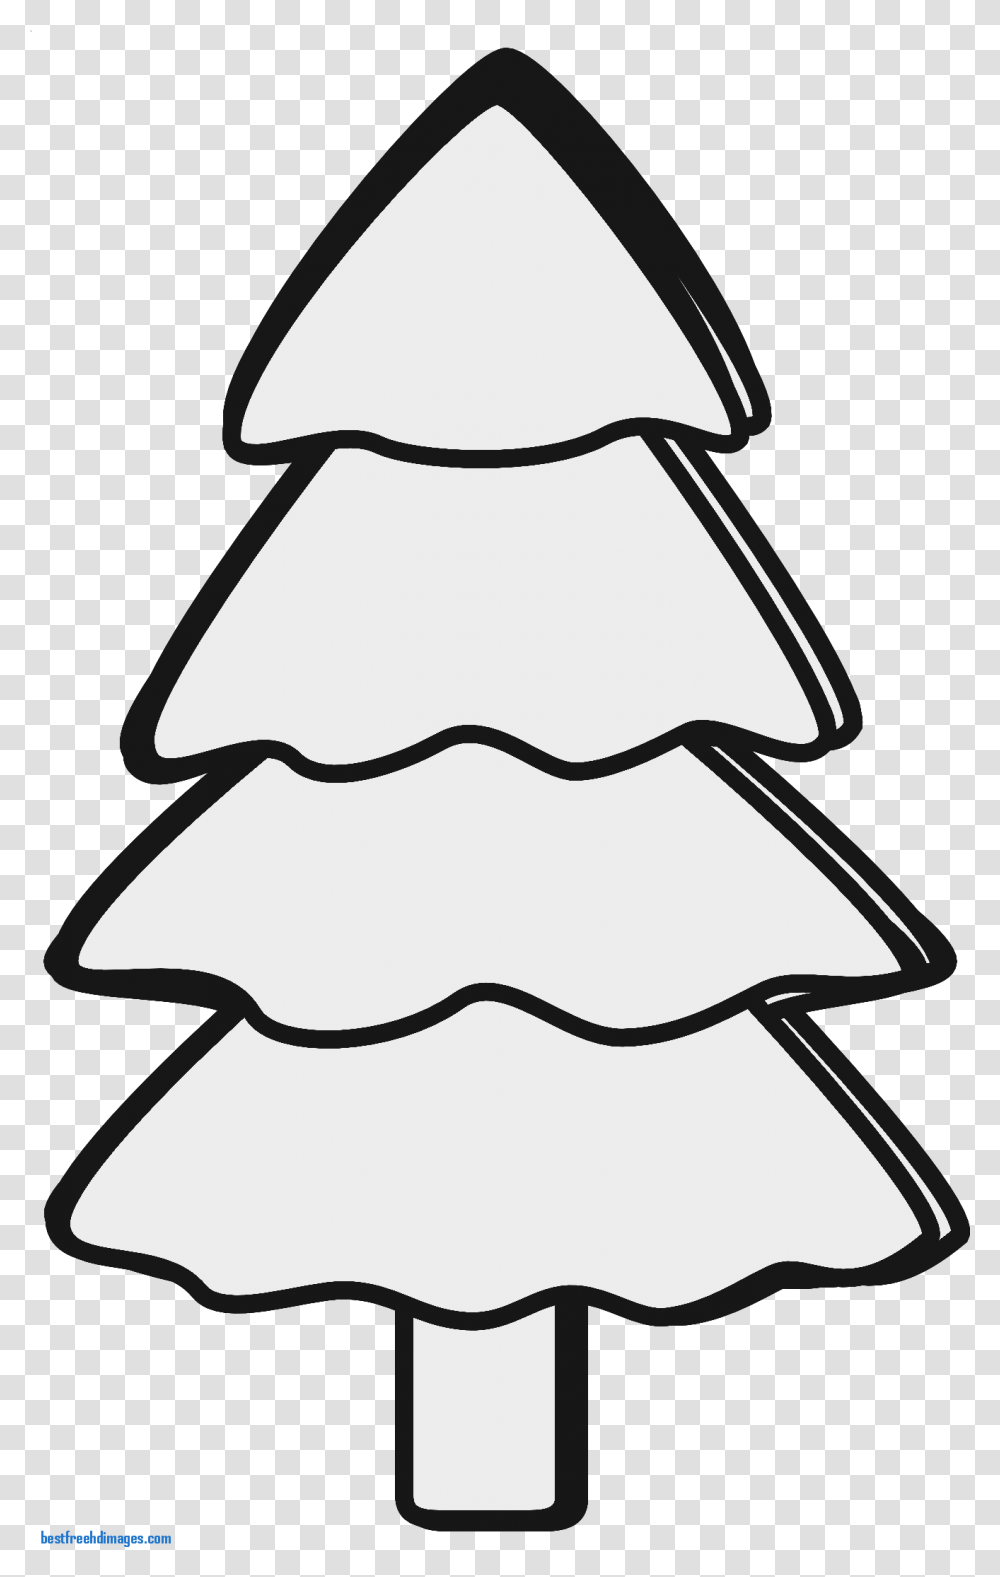 Christmas Tree Line Art Free Clip Christmas Tree Black And White Clipart, Stencil, Outdoors, Plant, Silhouette Transparent Png